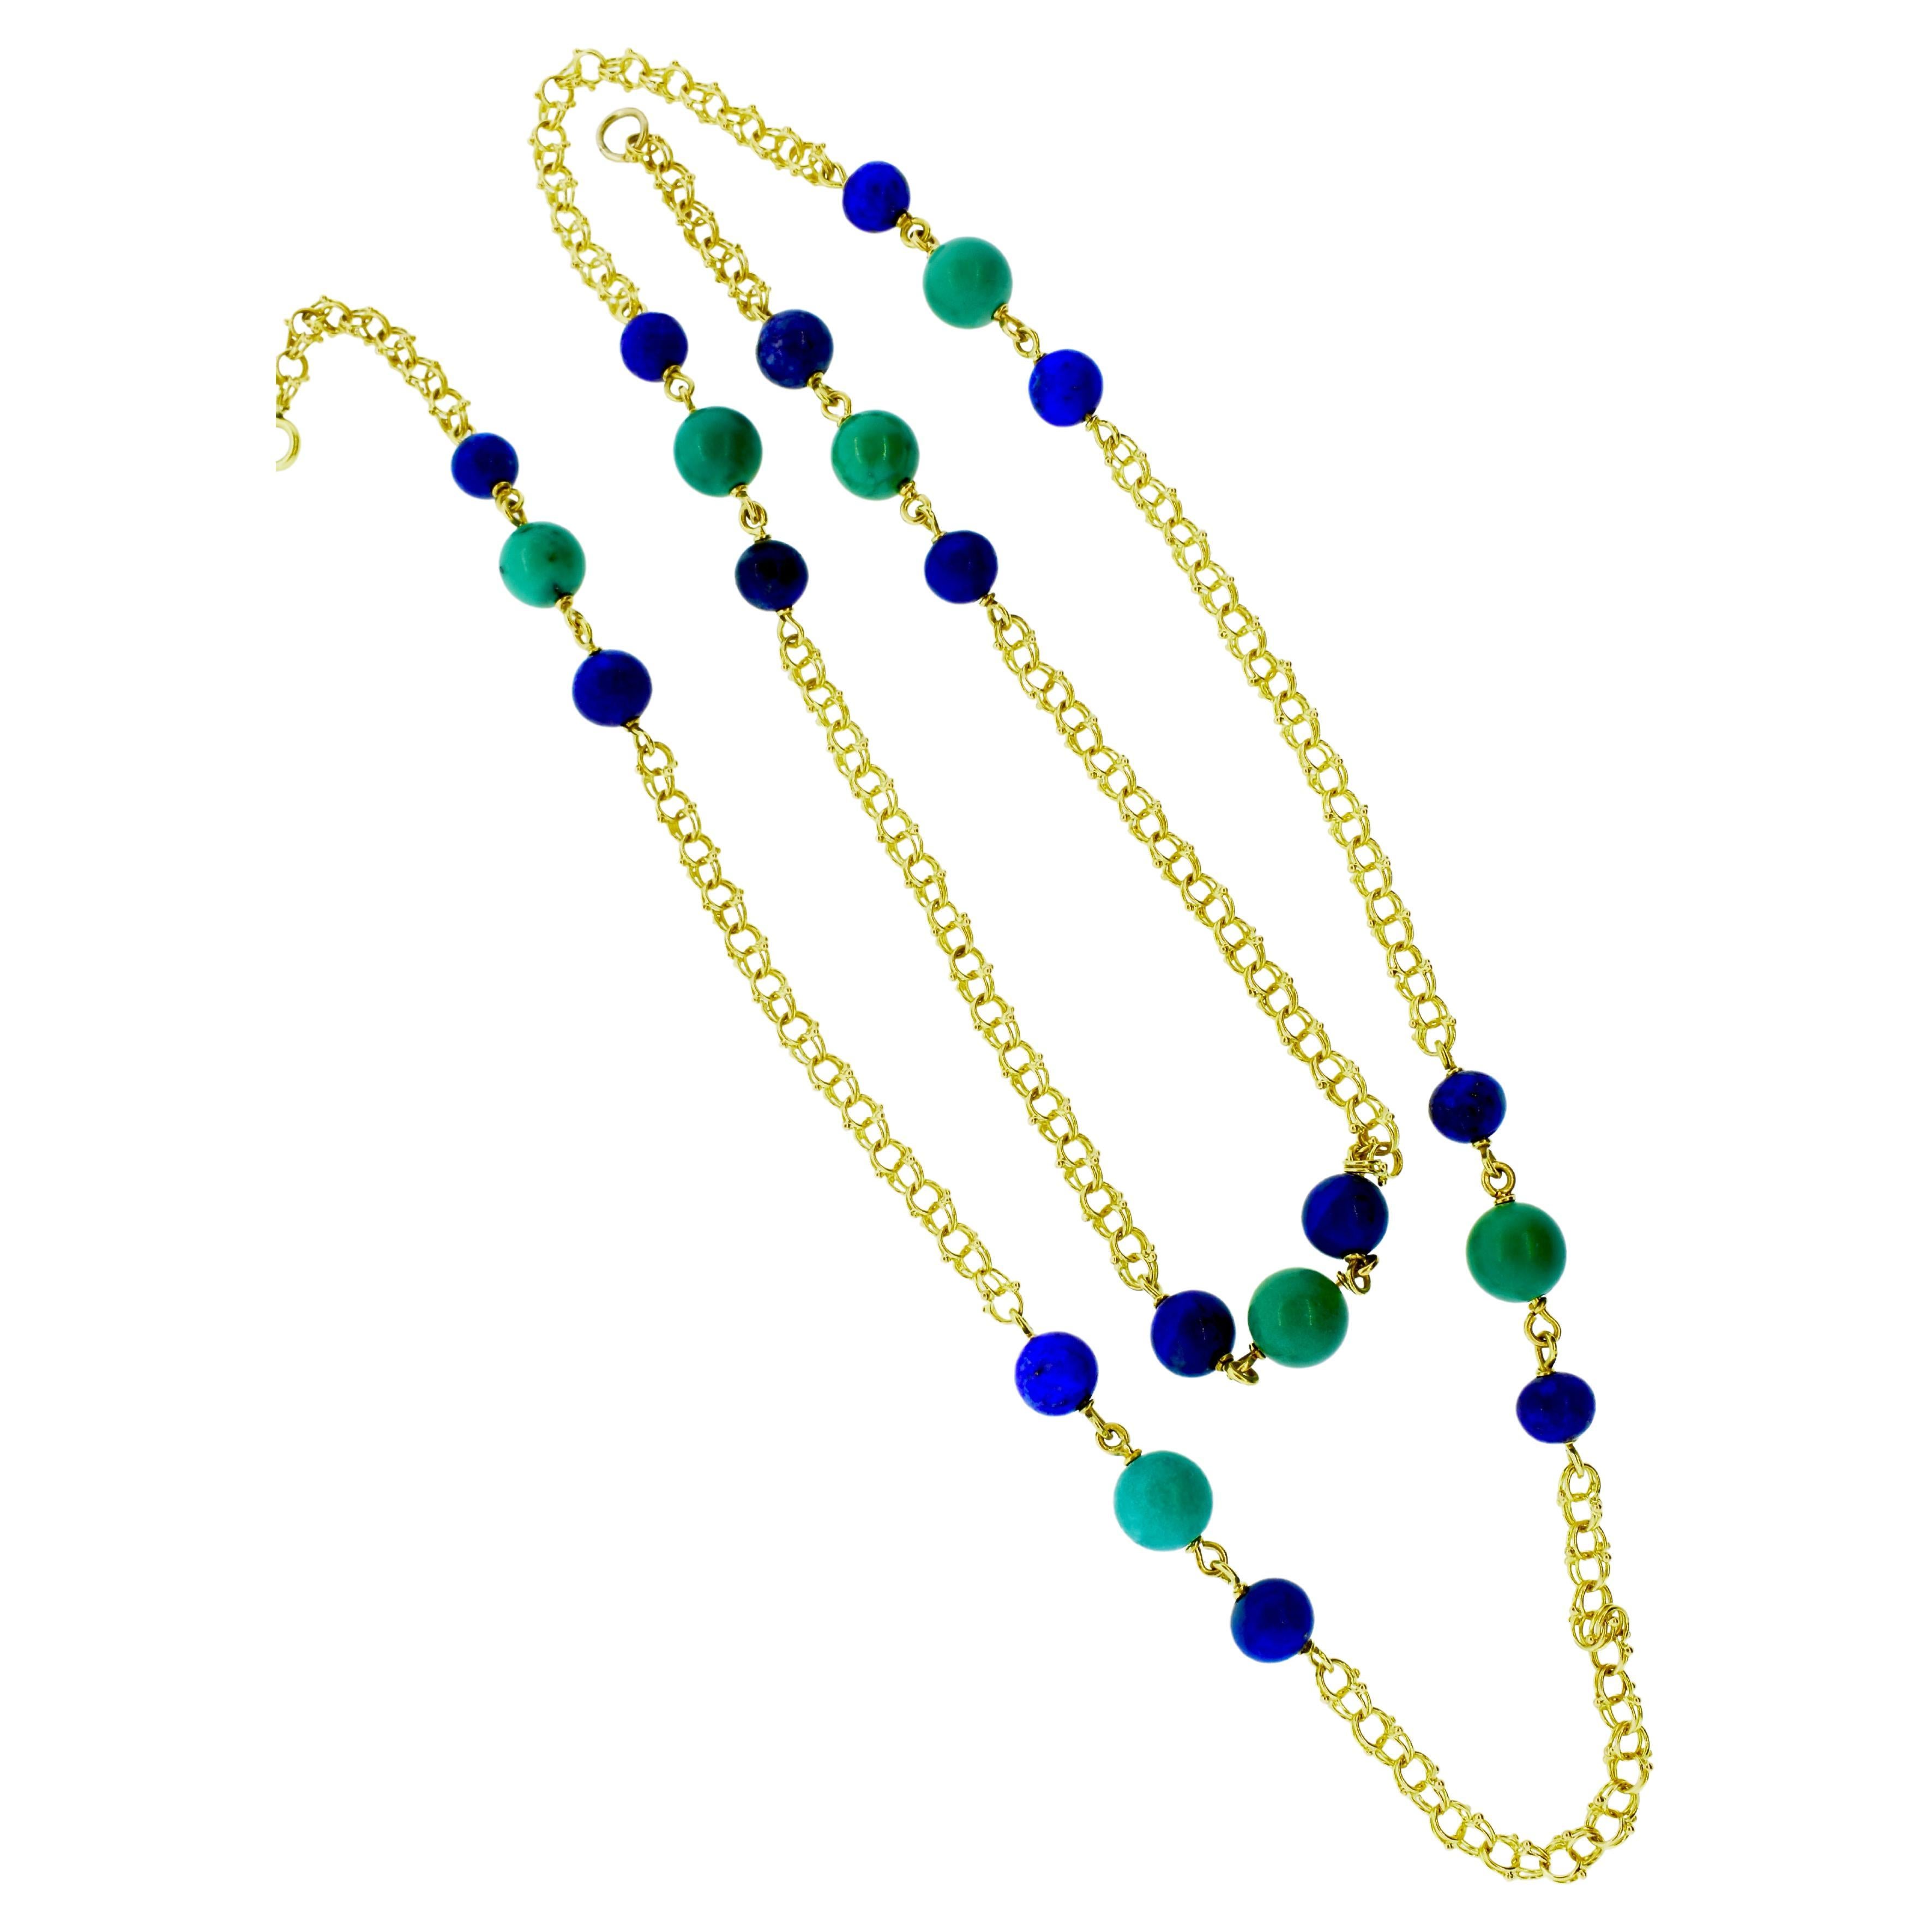 Bead Vintage Long Gold Chain interspersed with Lapis and Turquoise, c. 1960